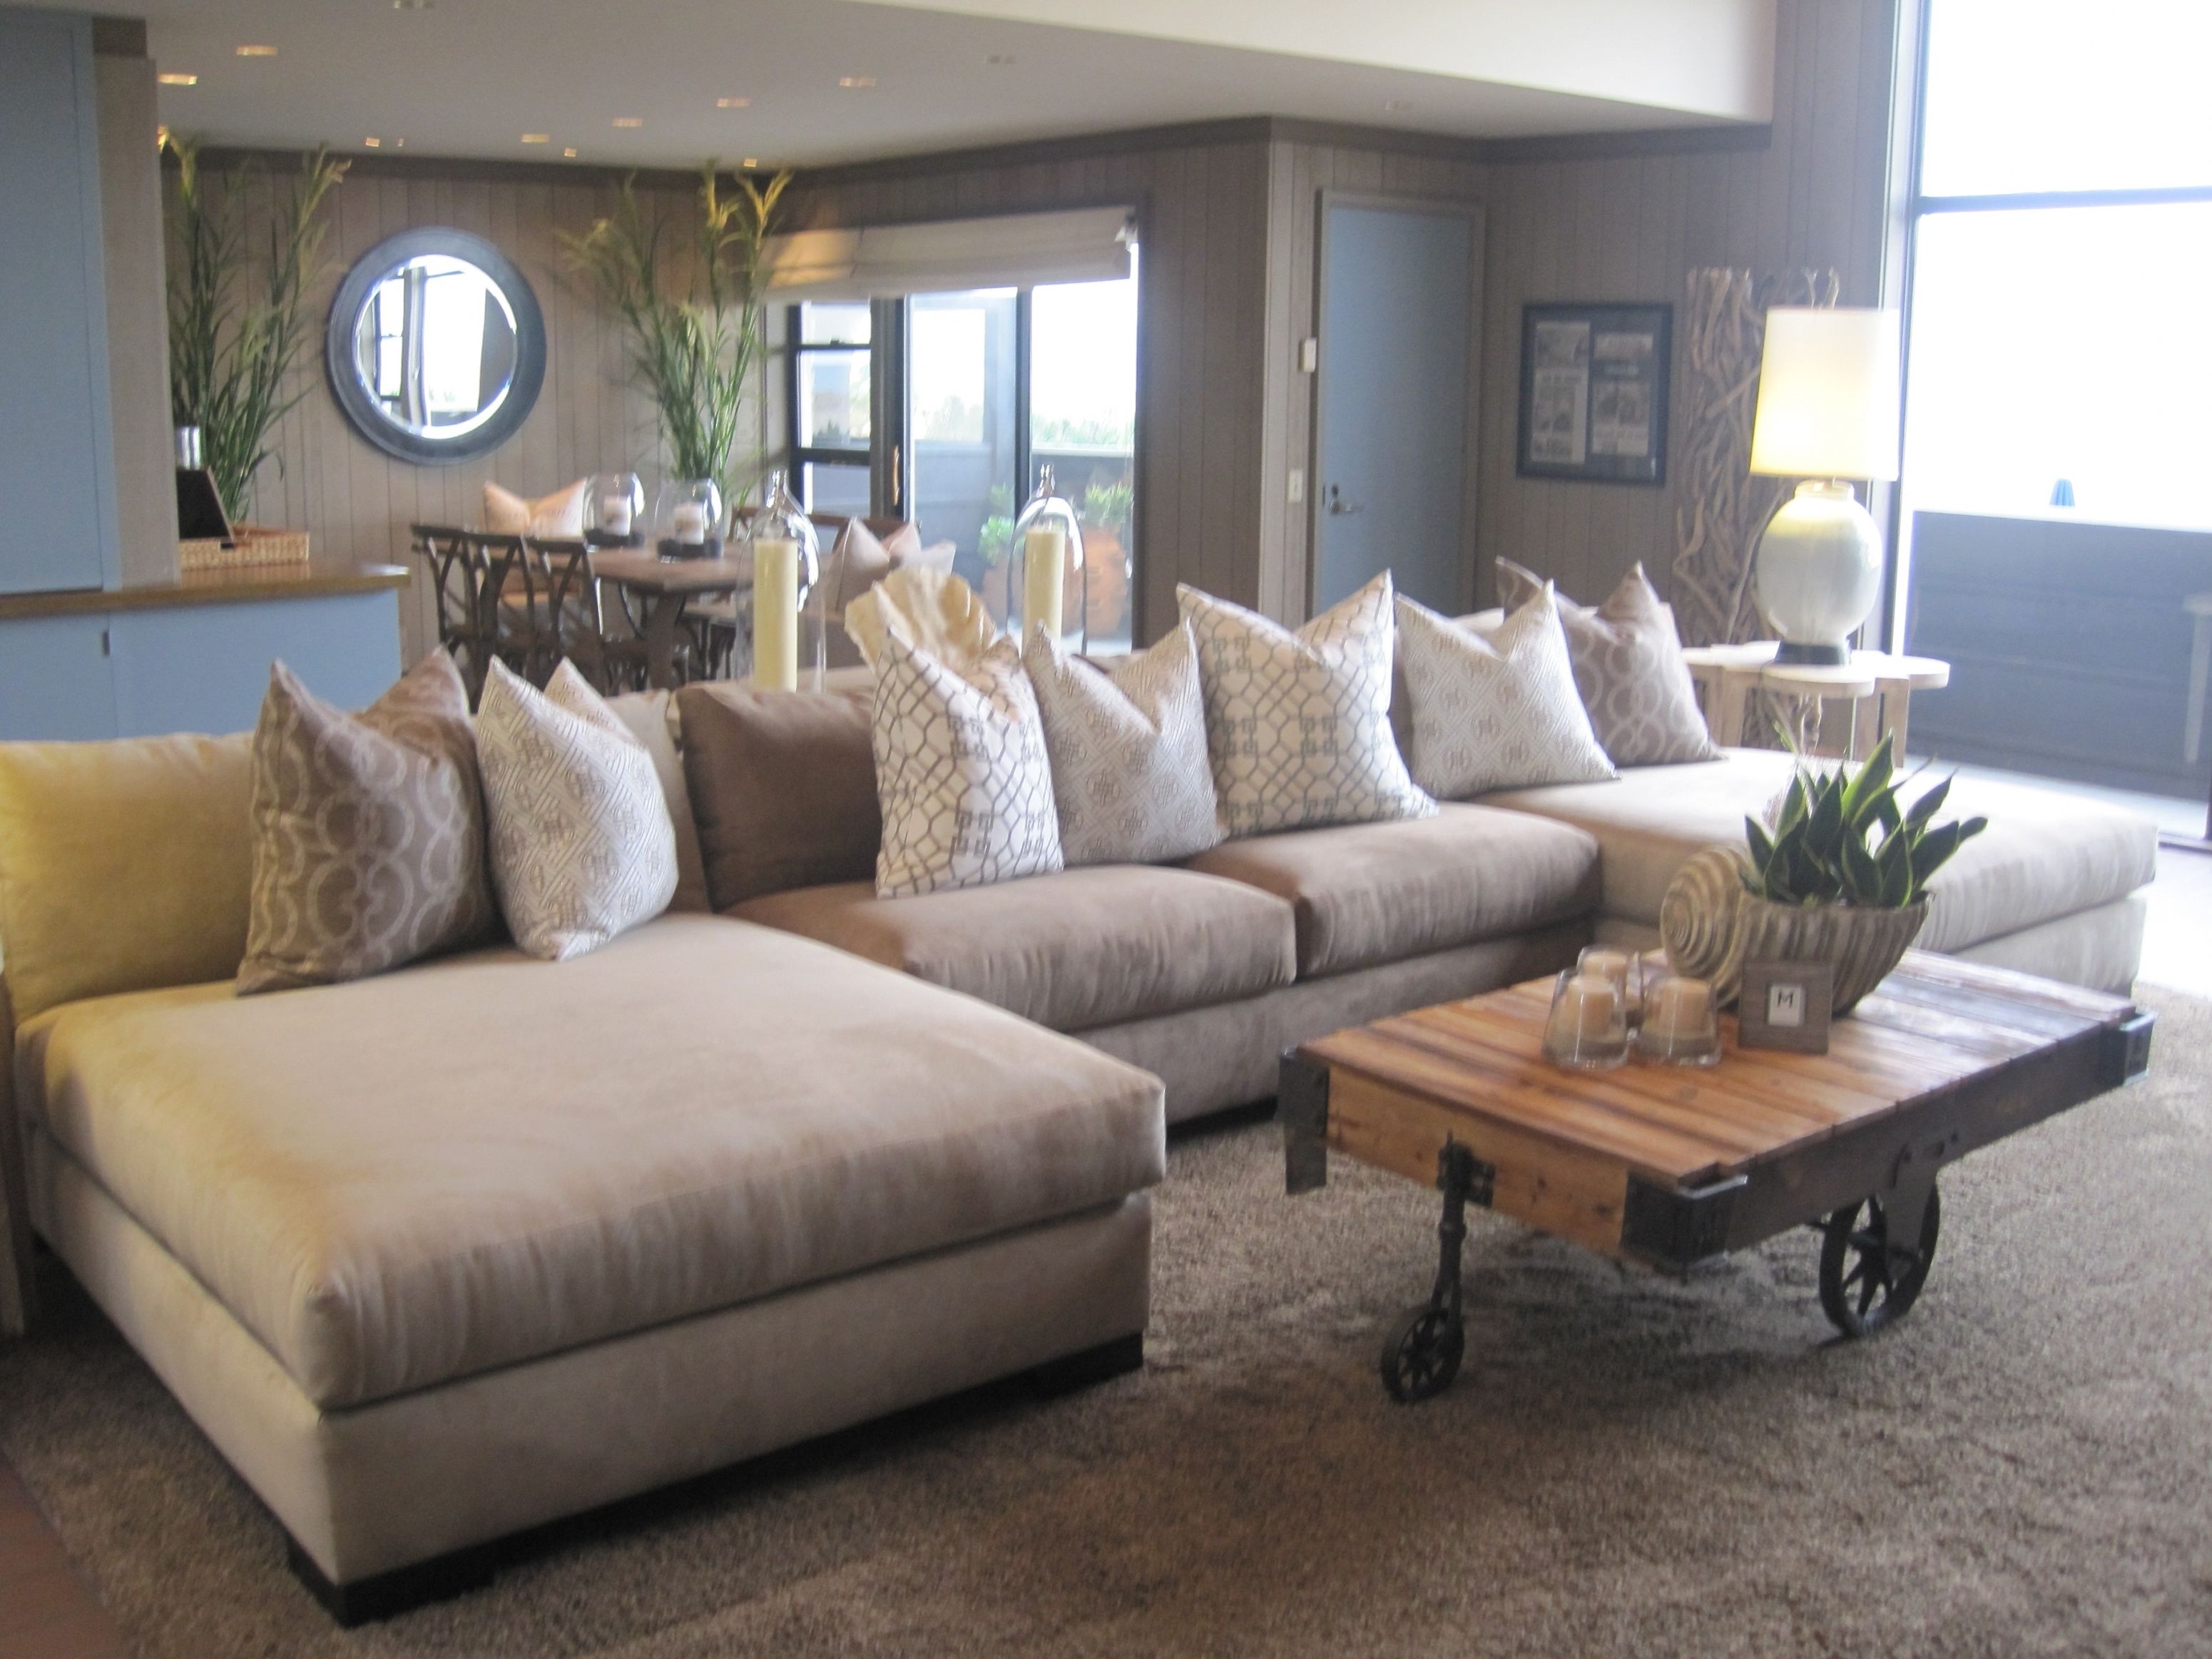 Preferred 25 Best Of Images Of Double Chaise Lounge Living Room (View 11 of 15)